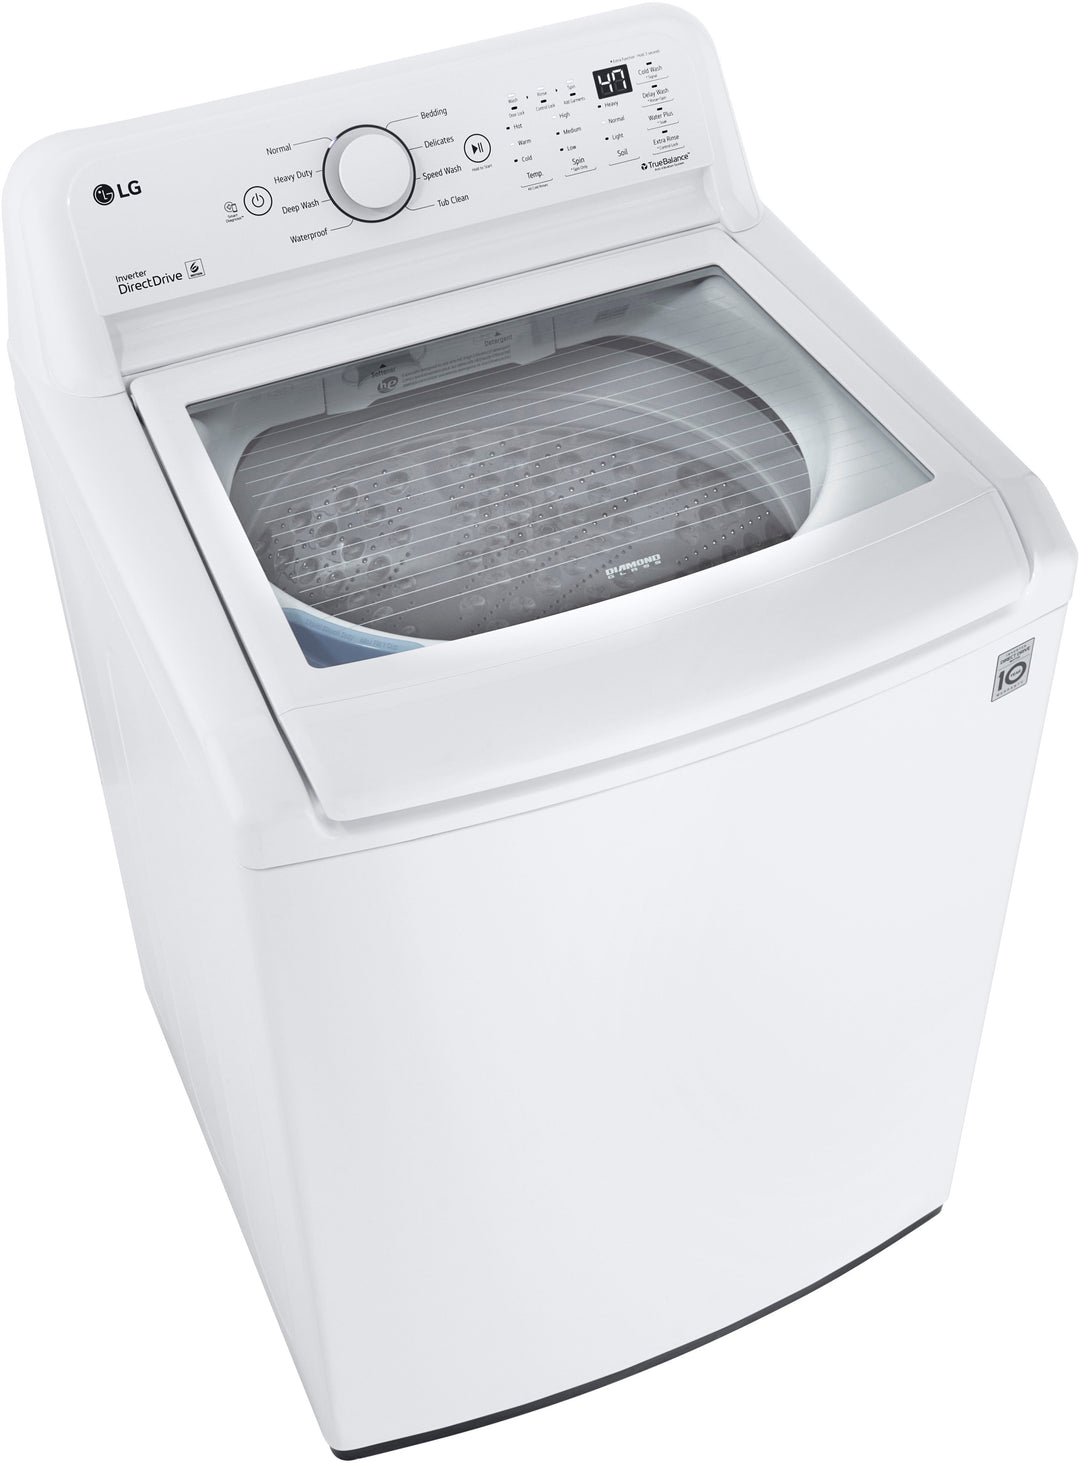 LG - 4.5 Cu. Ft. Smart Top Load Washer with Vibration Reduction and TurboDrum Technology - White_7